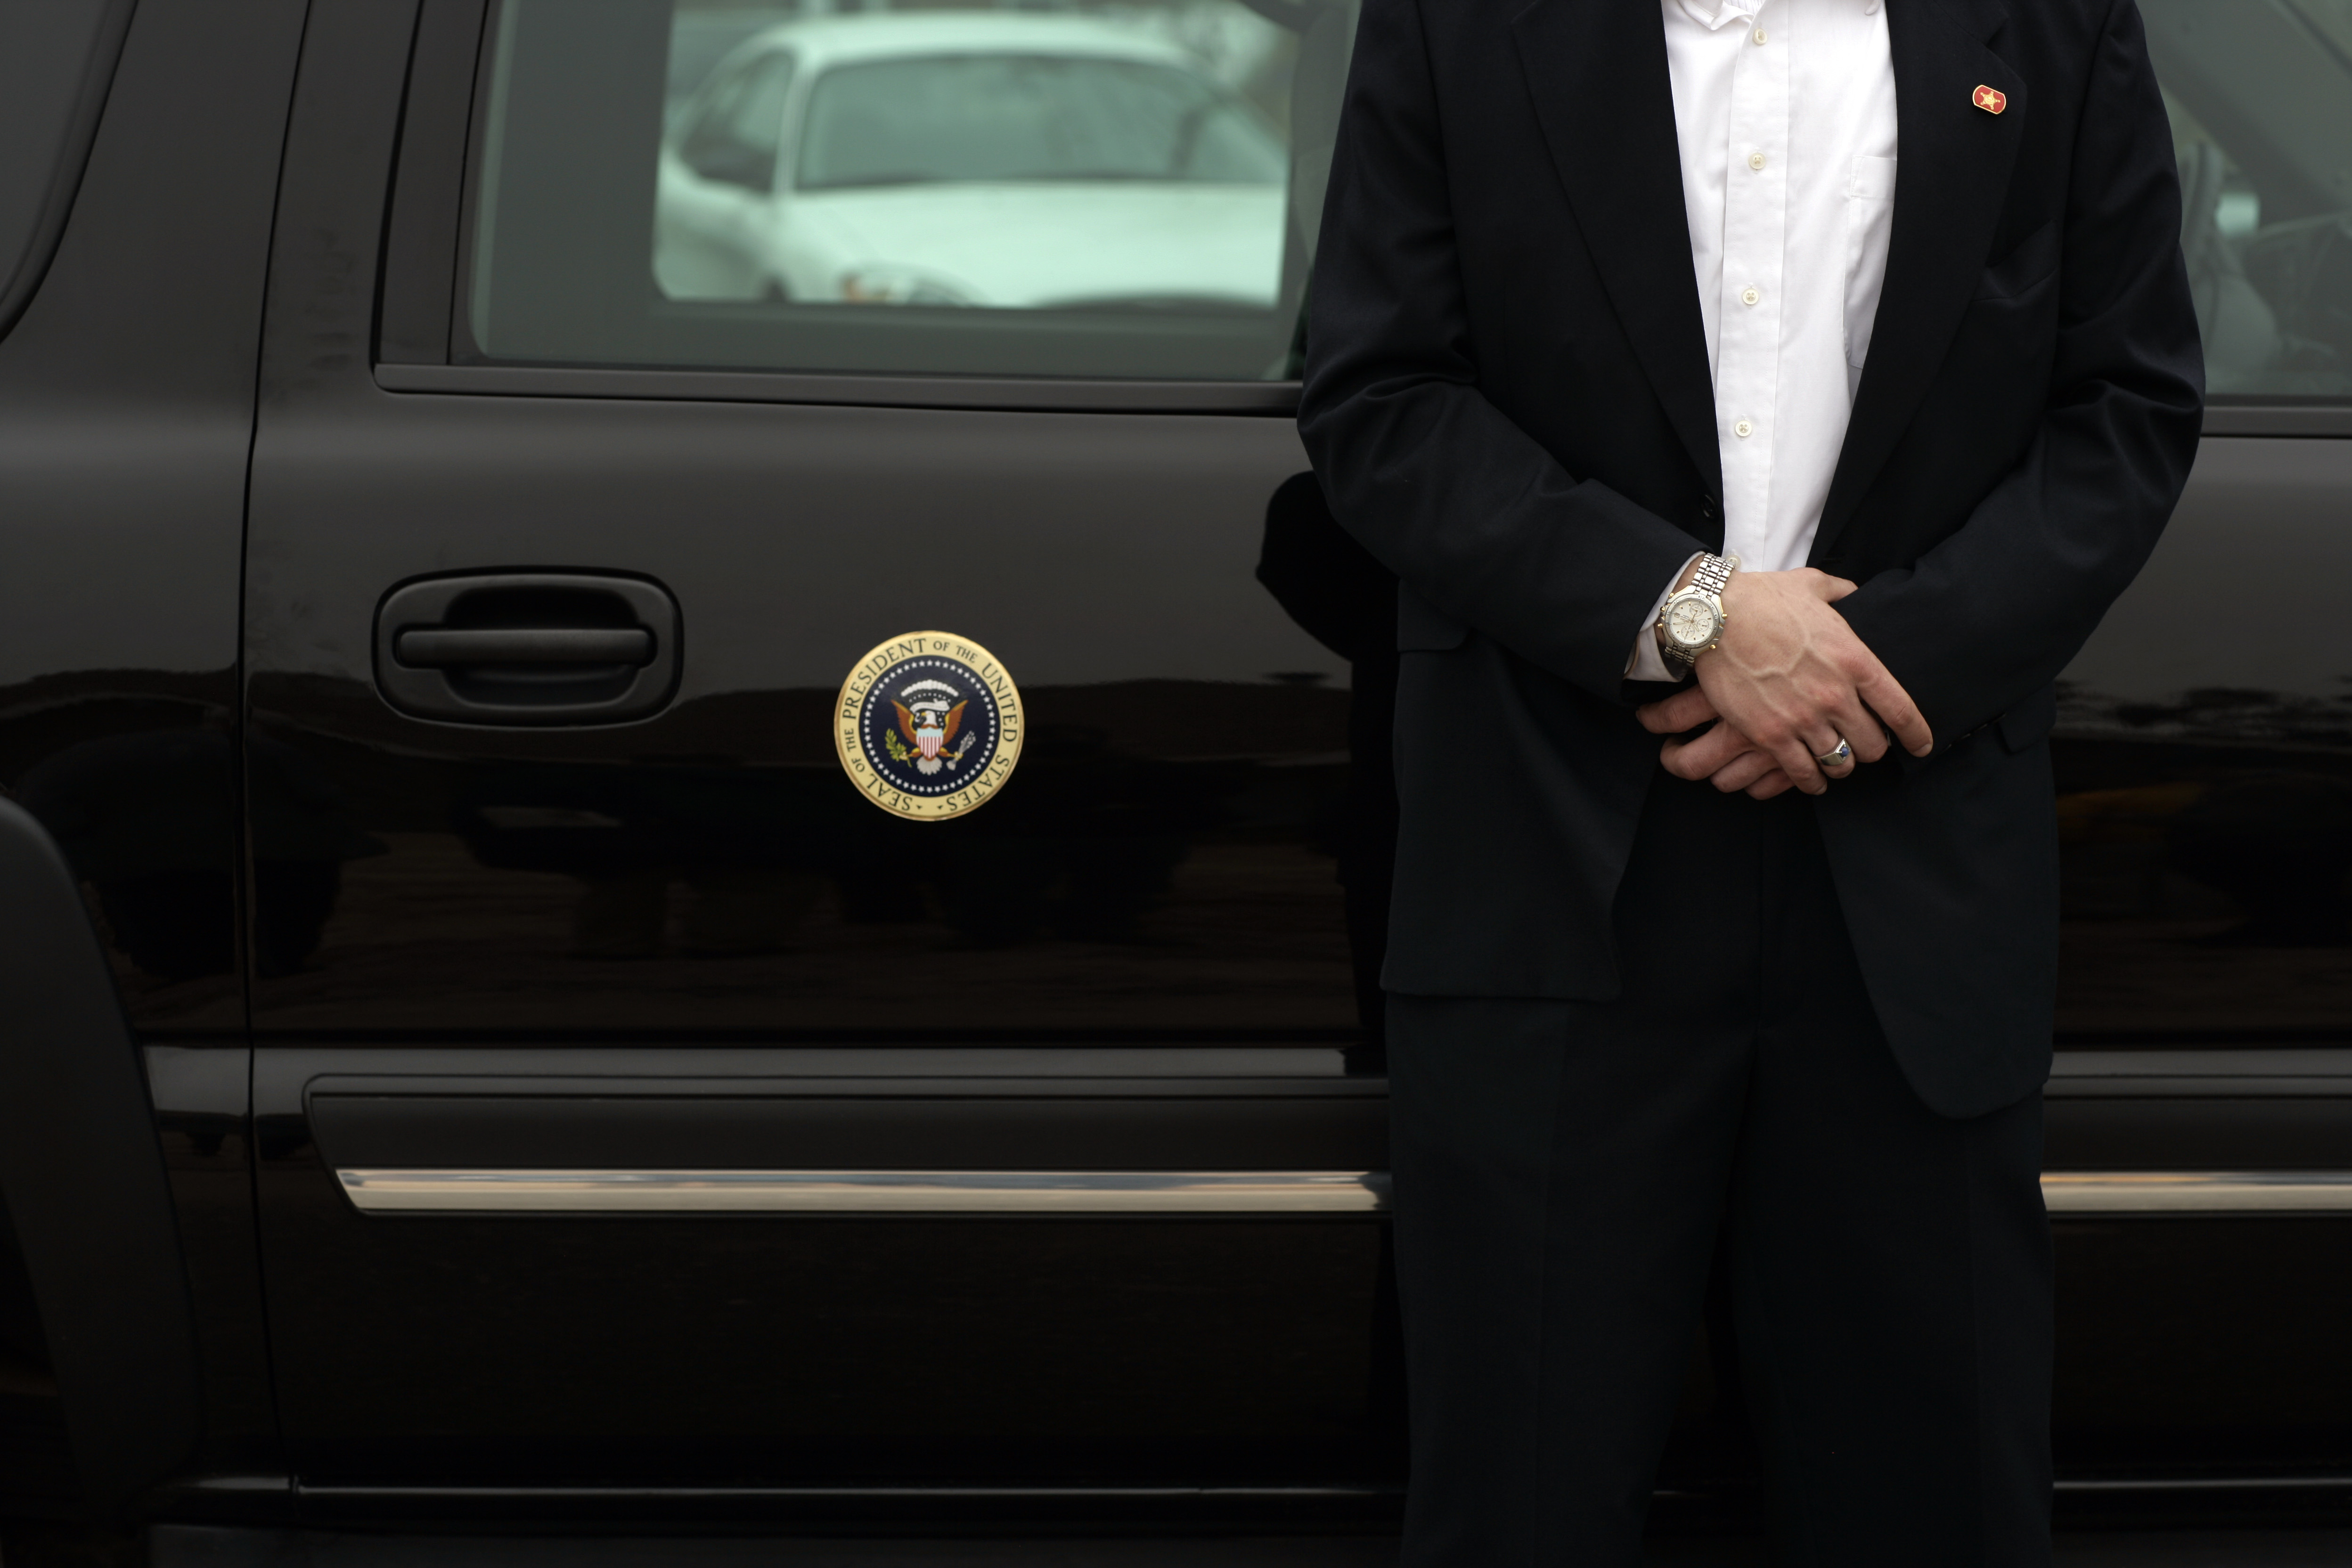 A Secret Service agent stands guard in front of President George W Bush's vehicle, while he tours rebuilding efforts in a neighborhood affected by Hurricane Katrina, in Long Beach, Miss. on March 1, 2007.